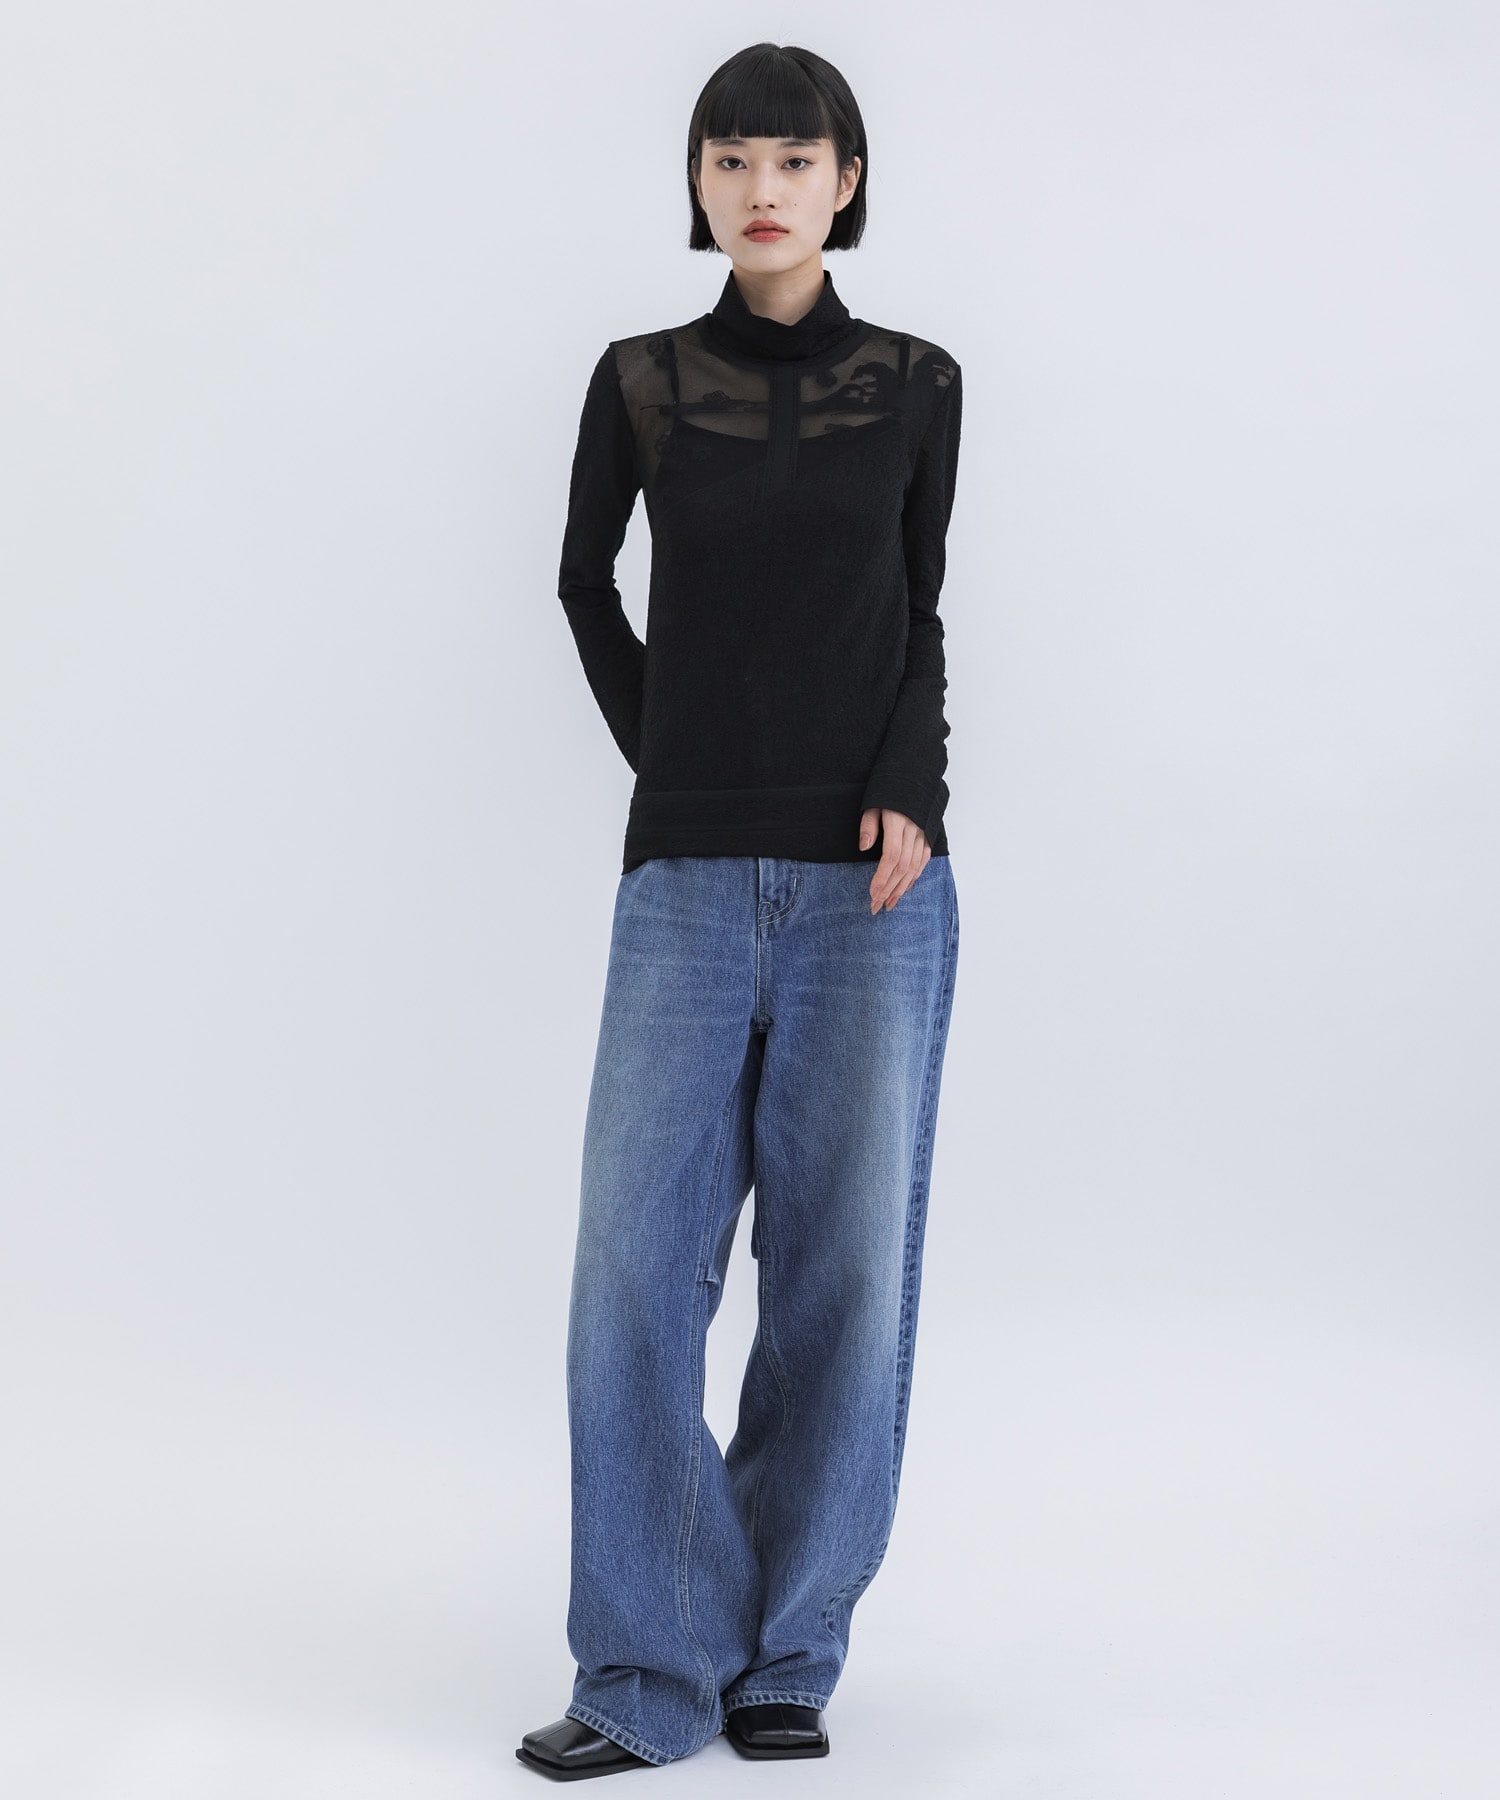 Landscape Graphic Sheer Knitted High Neck Top(1 BLACK): Mame 